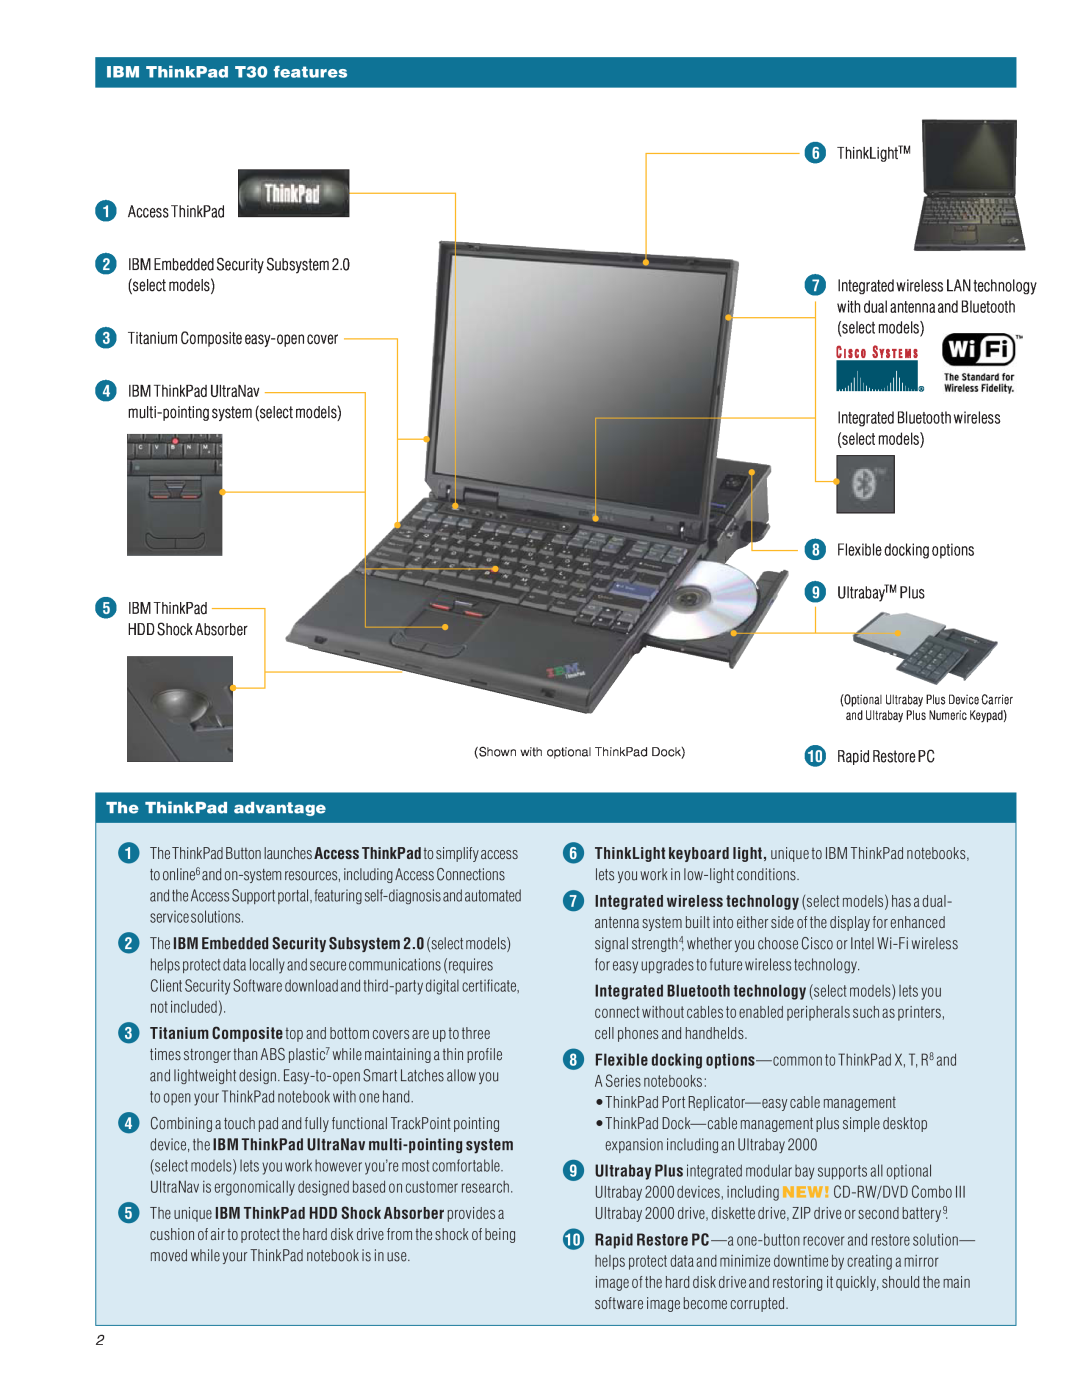 IBM manual IBM ThinkPad T30 features, Access ThinkPad 2 IBM Embedded Security Subsystem 2.0 select models, ThinkLightTM 